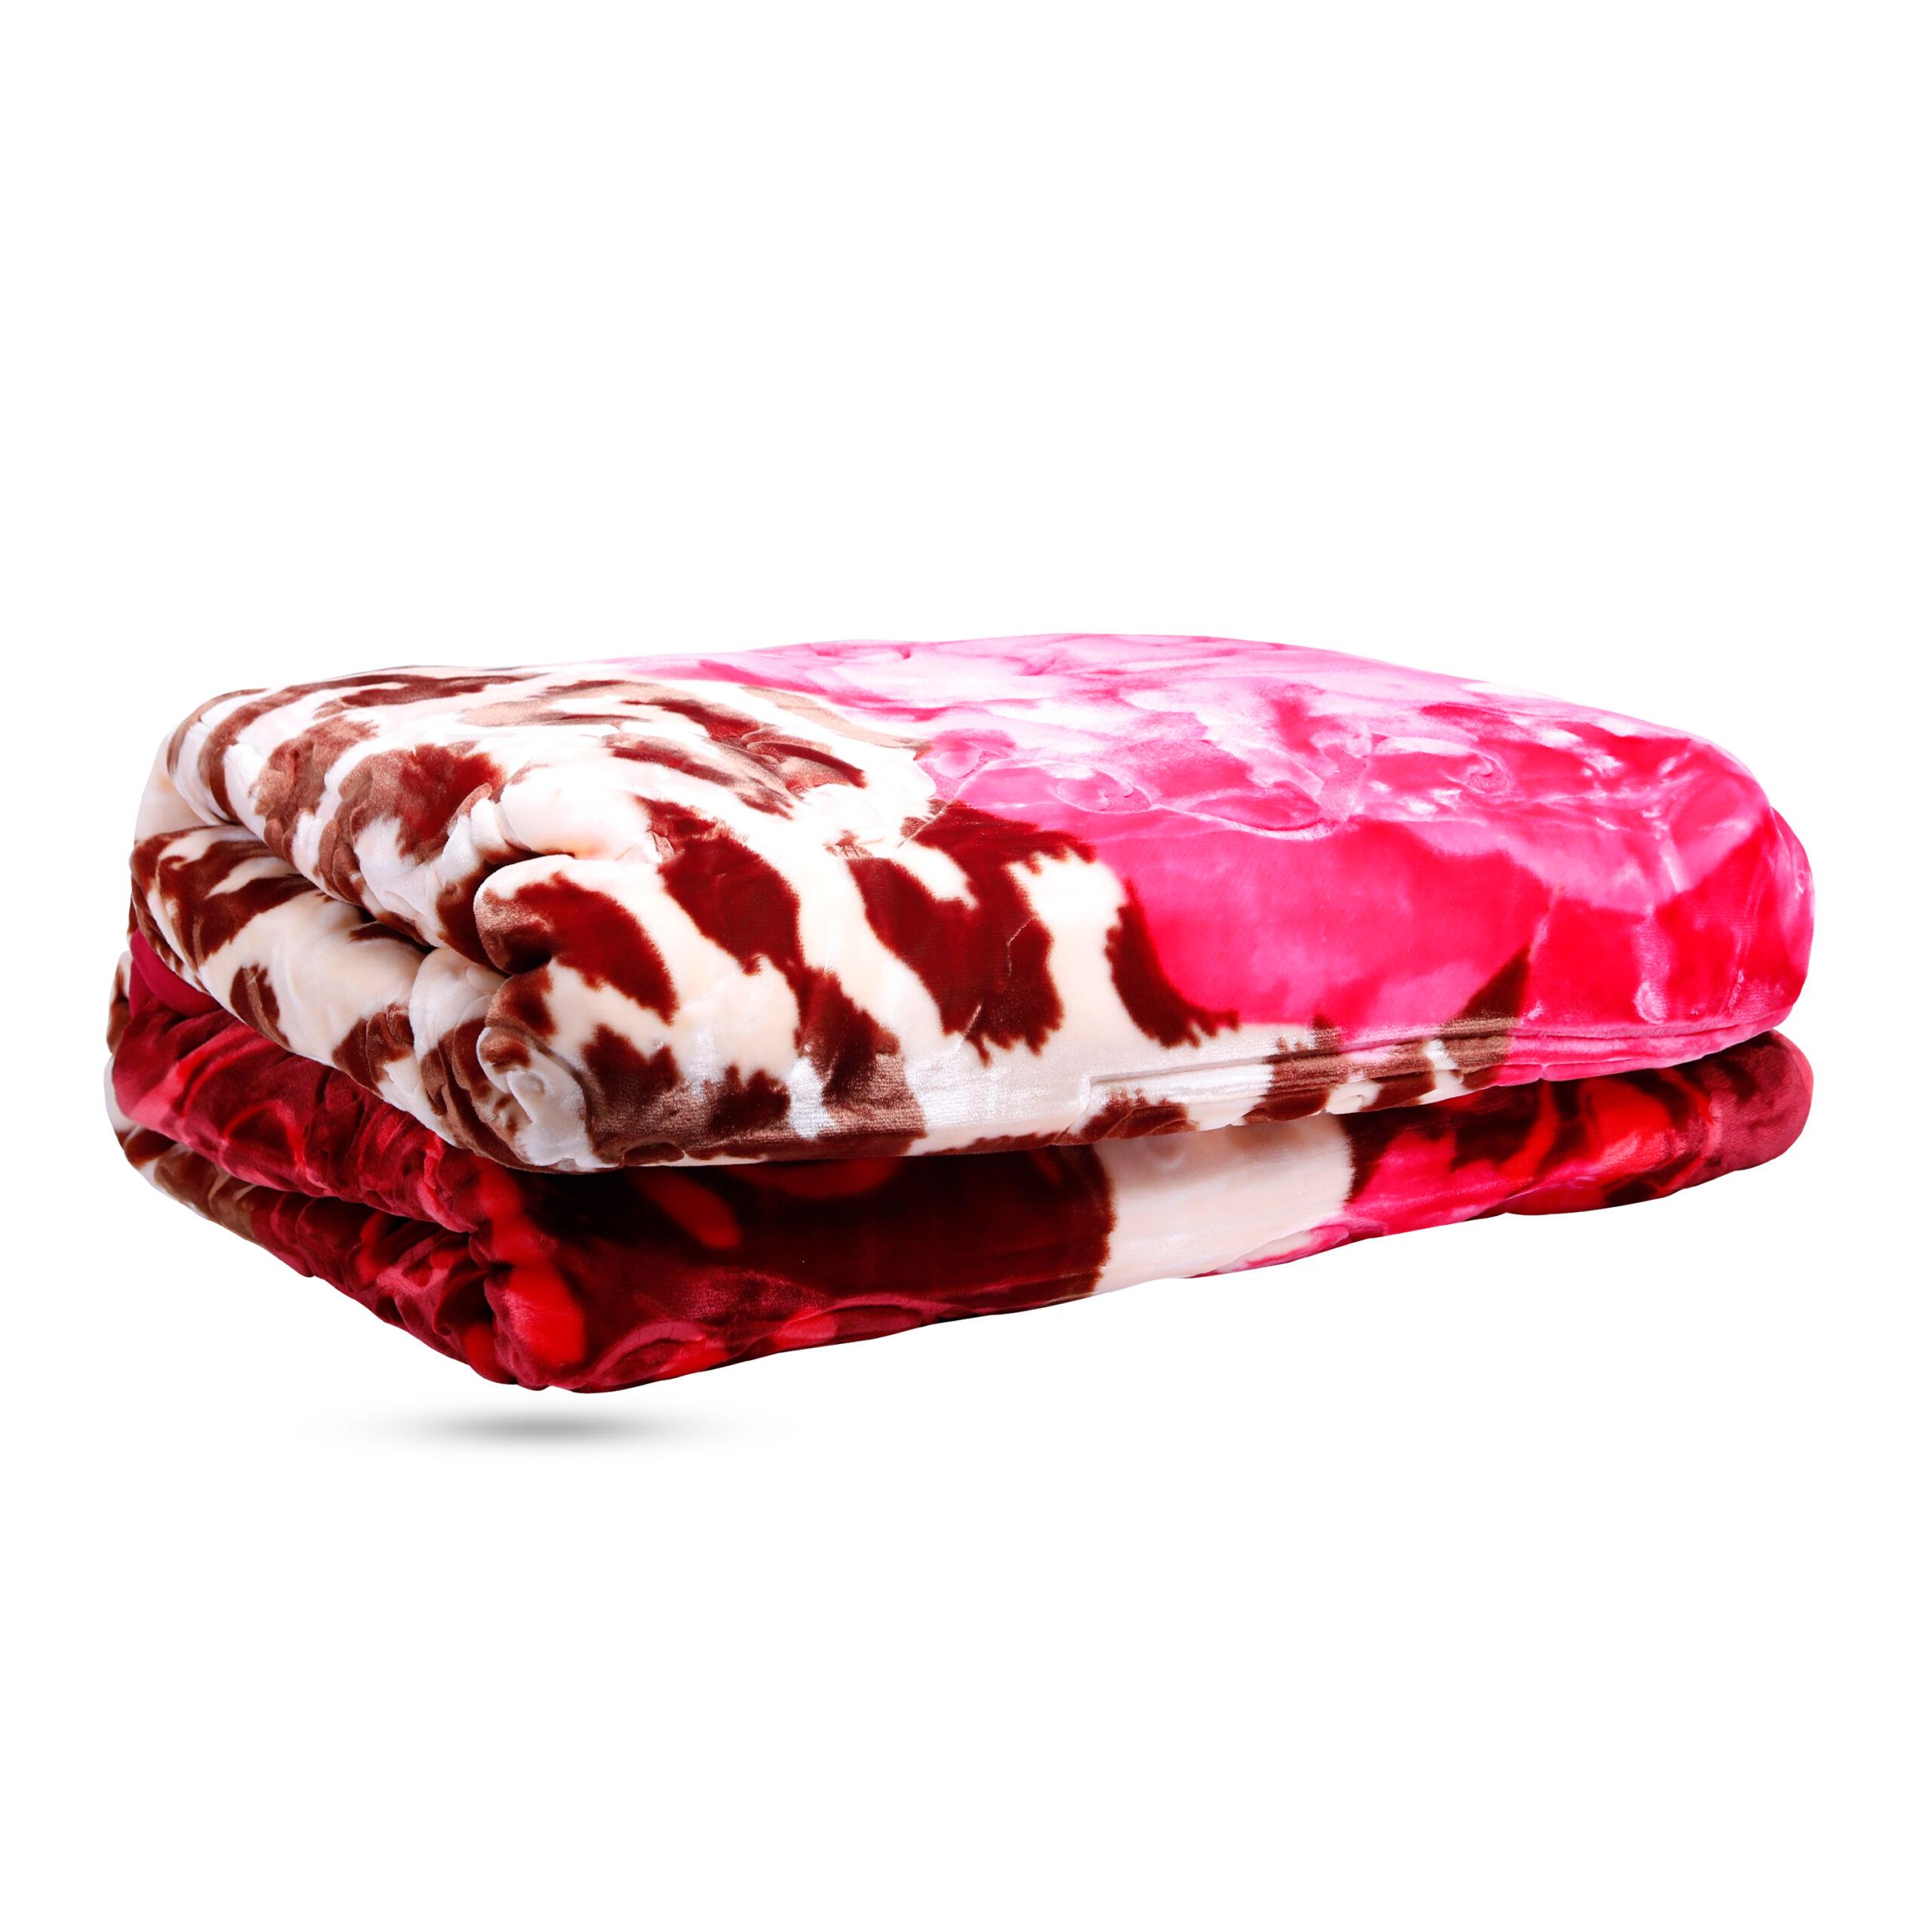 PARRY LIFE PLBL7531M2 Emarati Floral Maroon Bordered Double 2 Ply Embossed Blanket 200*240 Cm,Soft And Warm